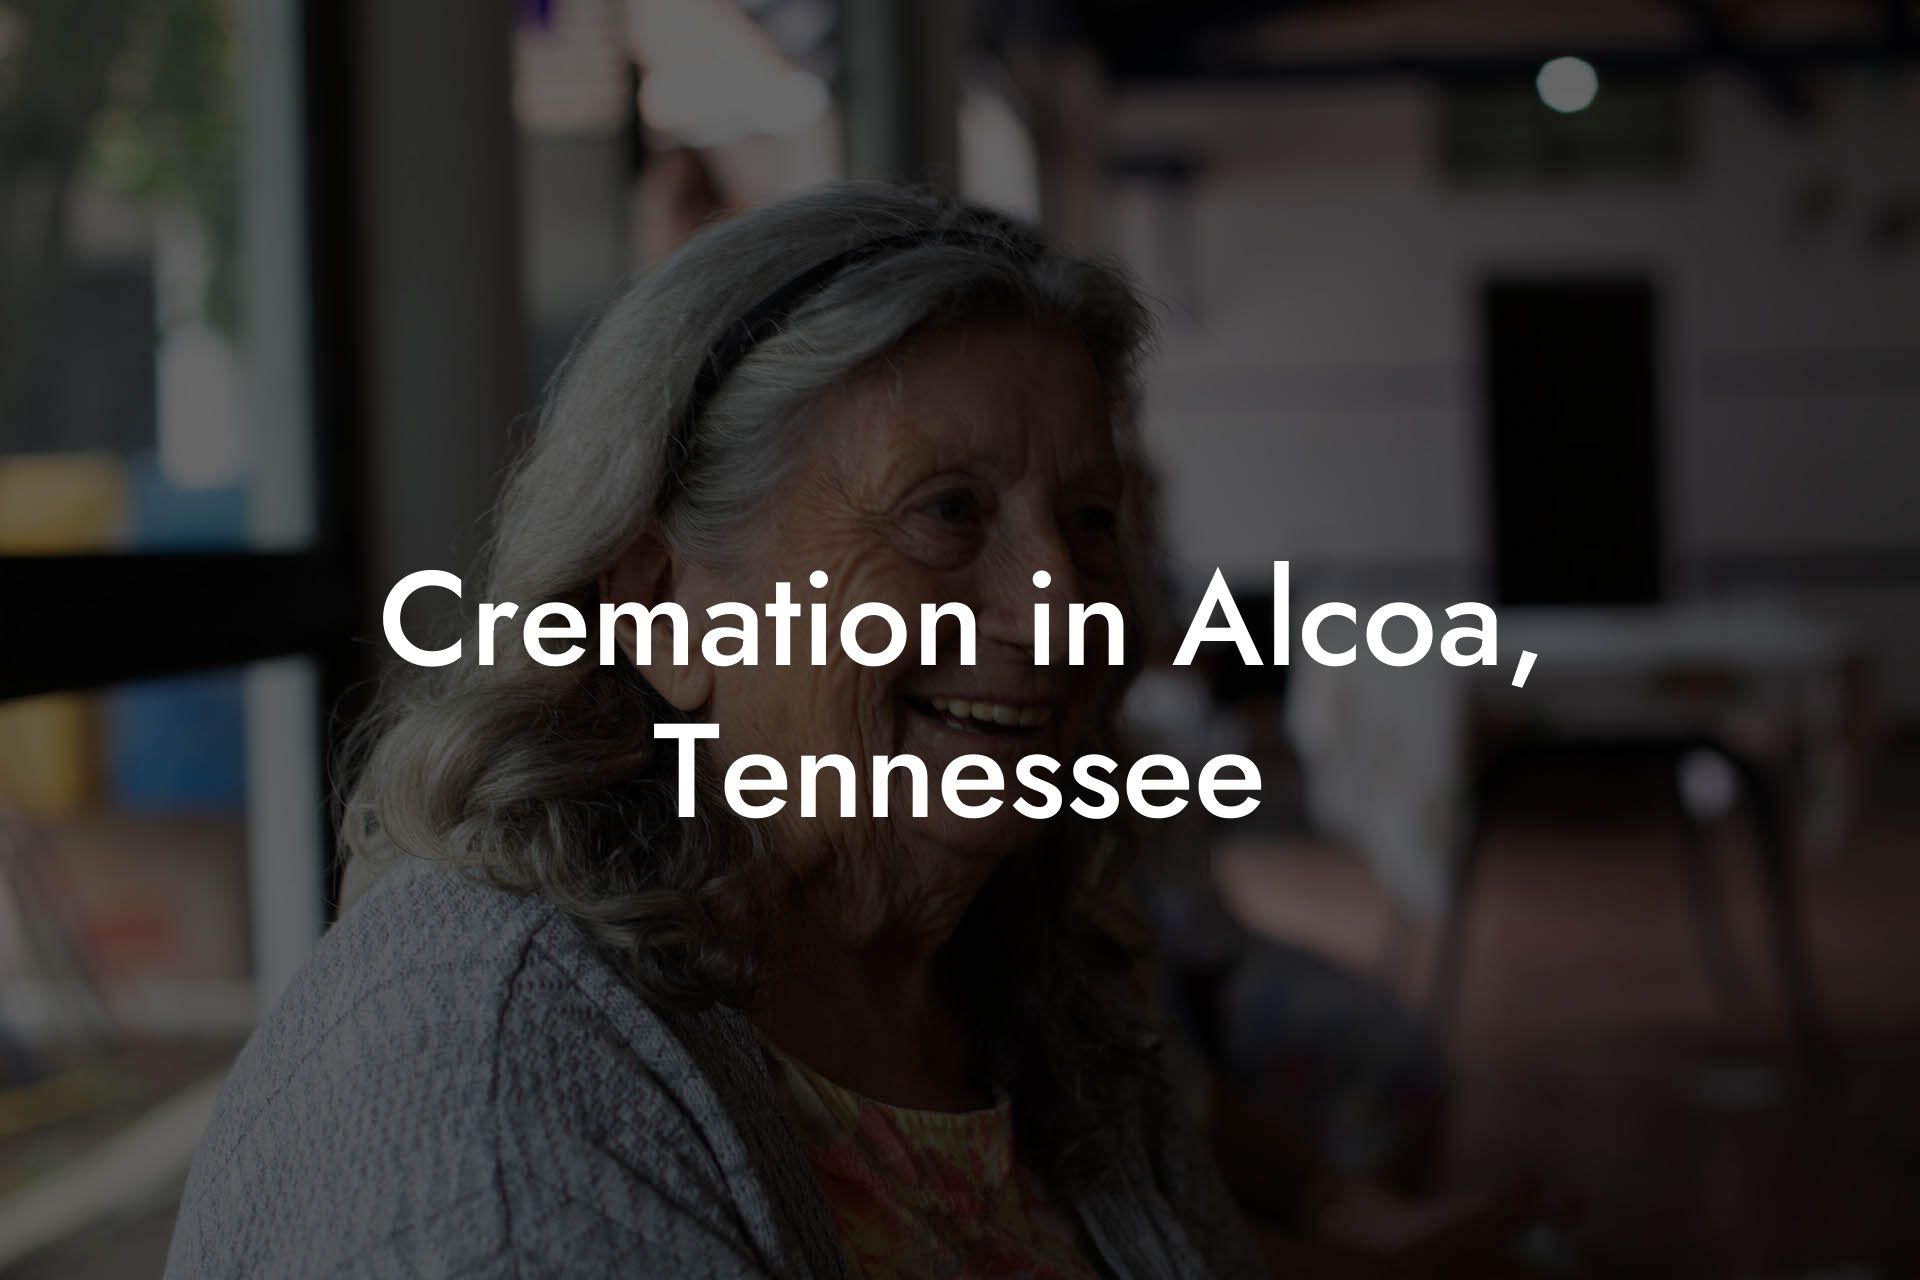 Cremation in Alcoa, Tennessee